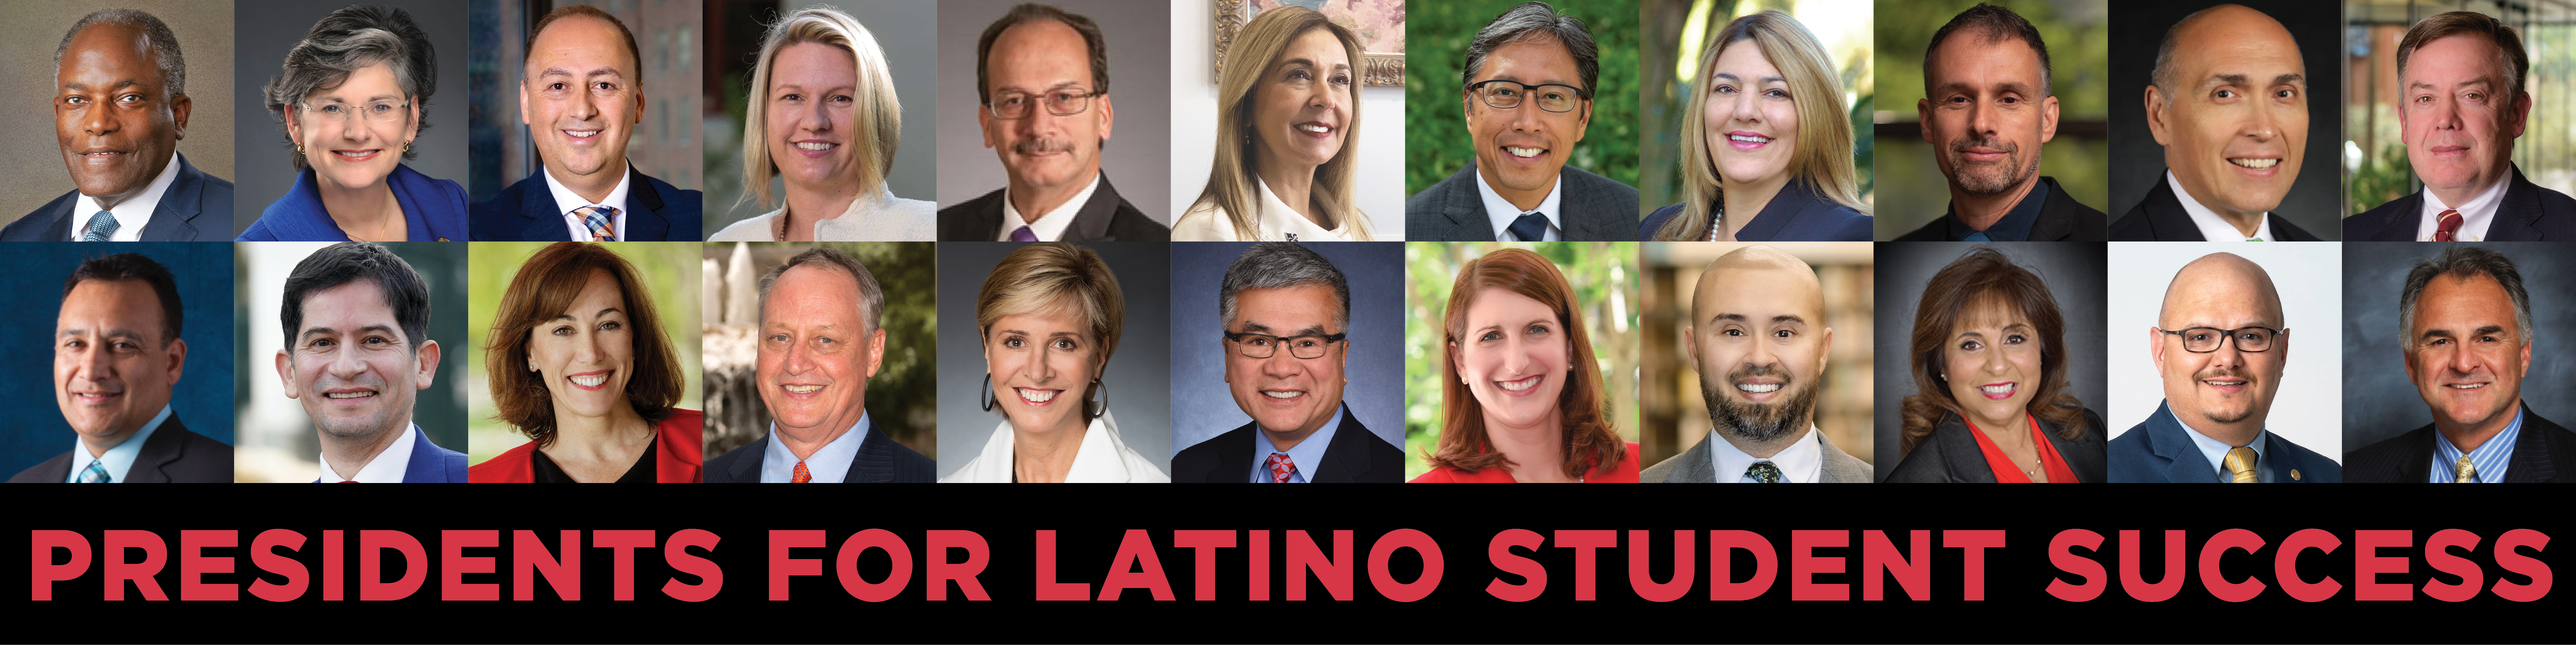 President For Latino Student Success - Web banner featuring presidents from the network